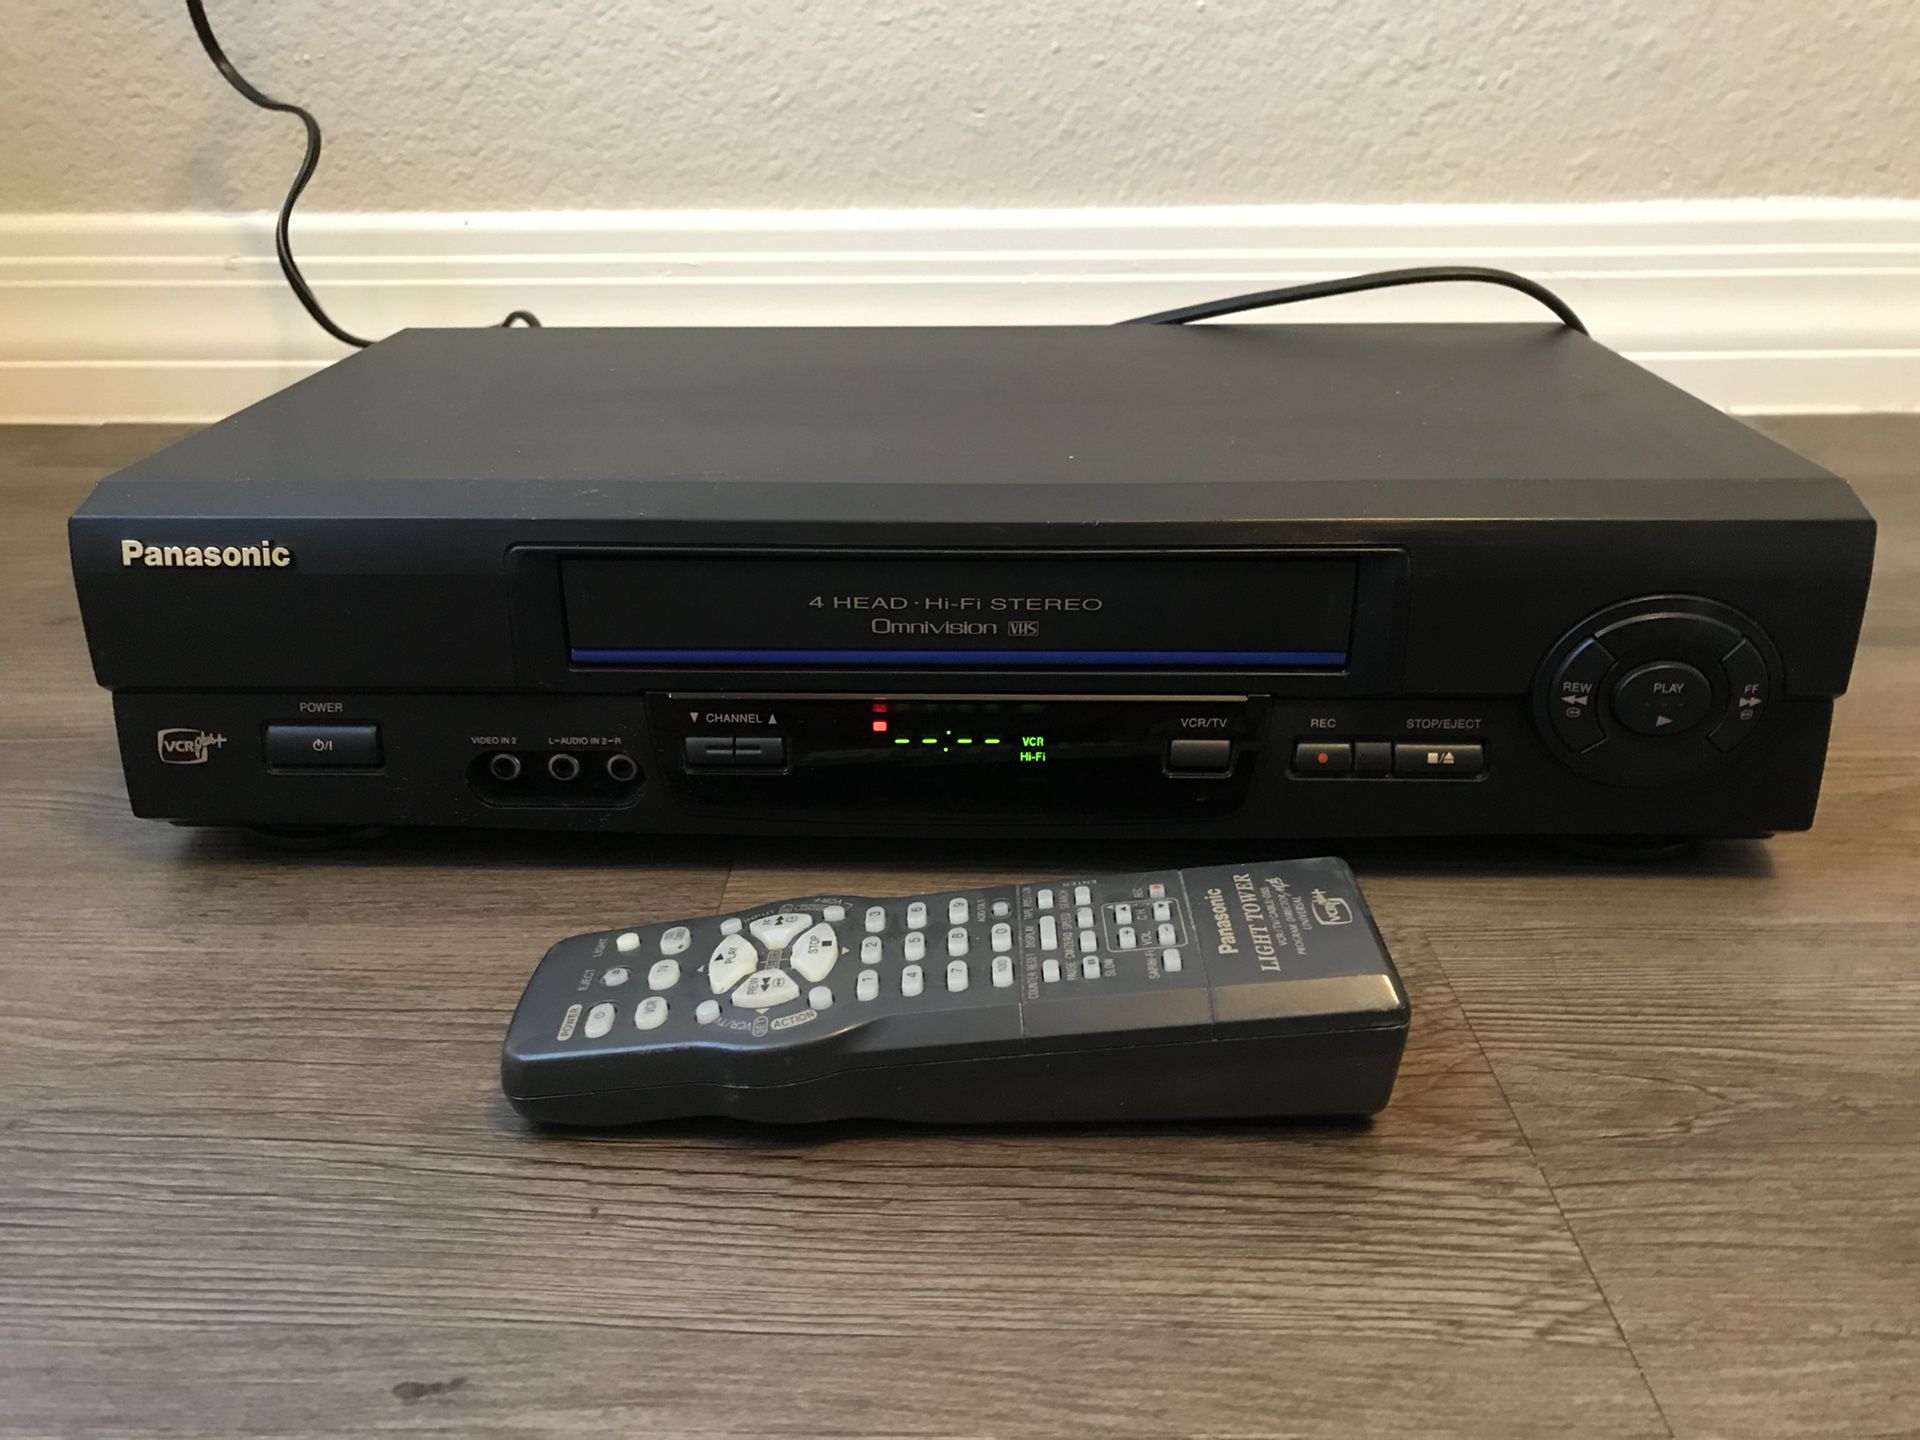 Panasonic 4 head hi-fi stereo omnivision vcr plus VHS player model vp-v4611 with remote WORKING